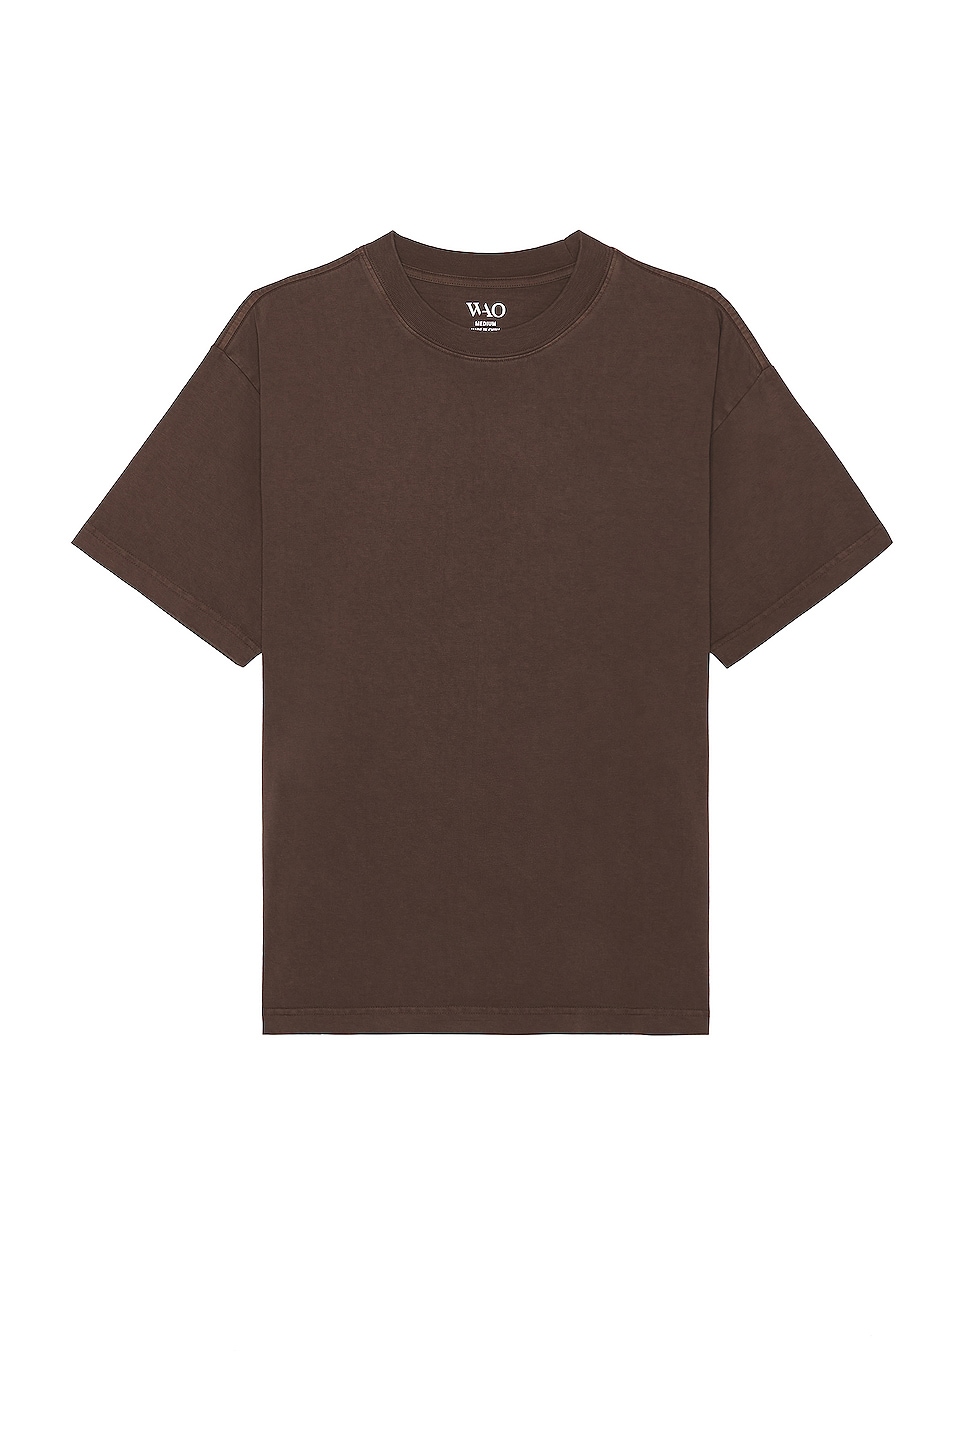 Image 1 of WAO The Relaxed Tee in brown